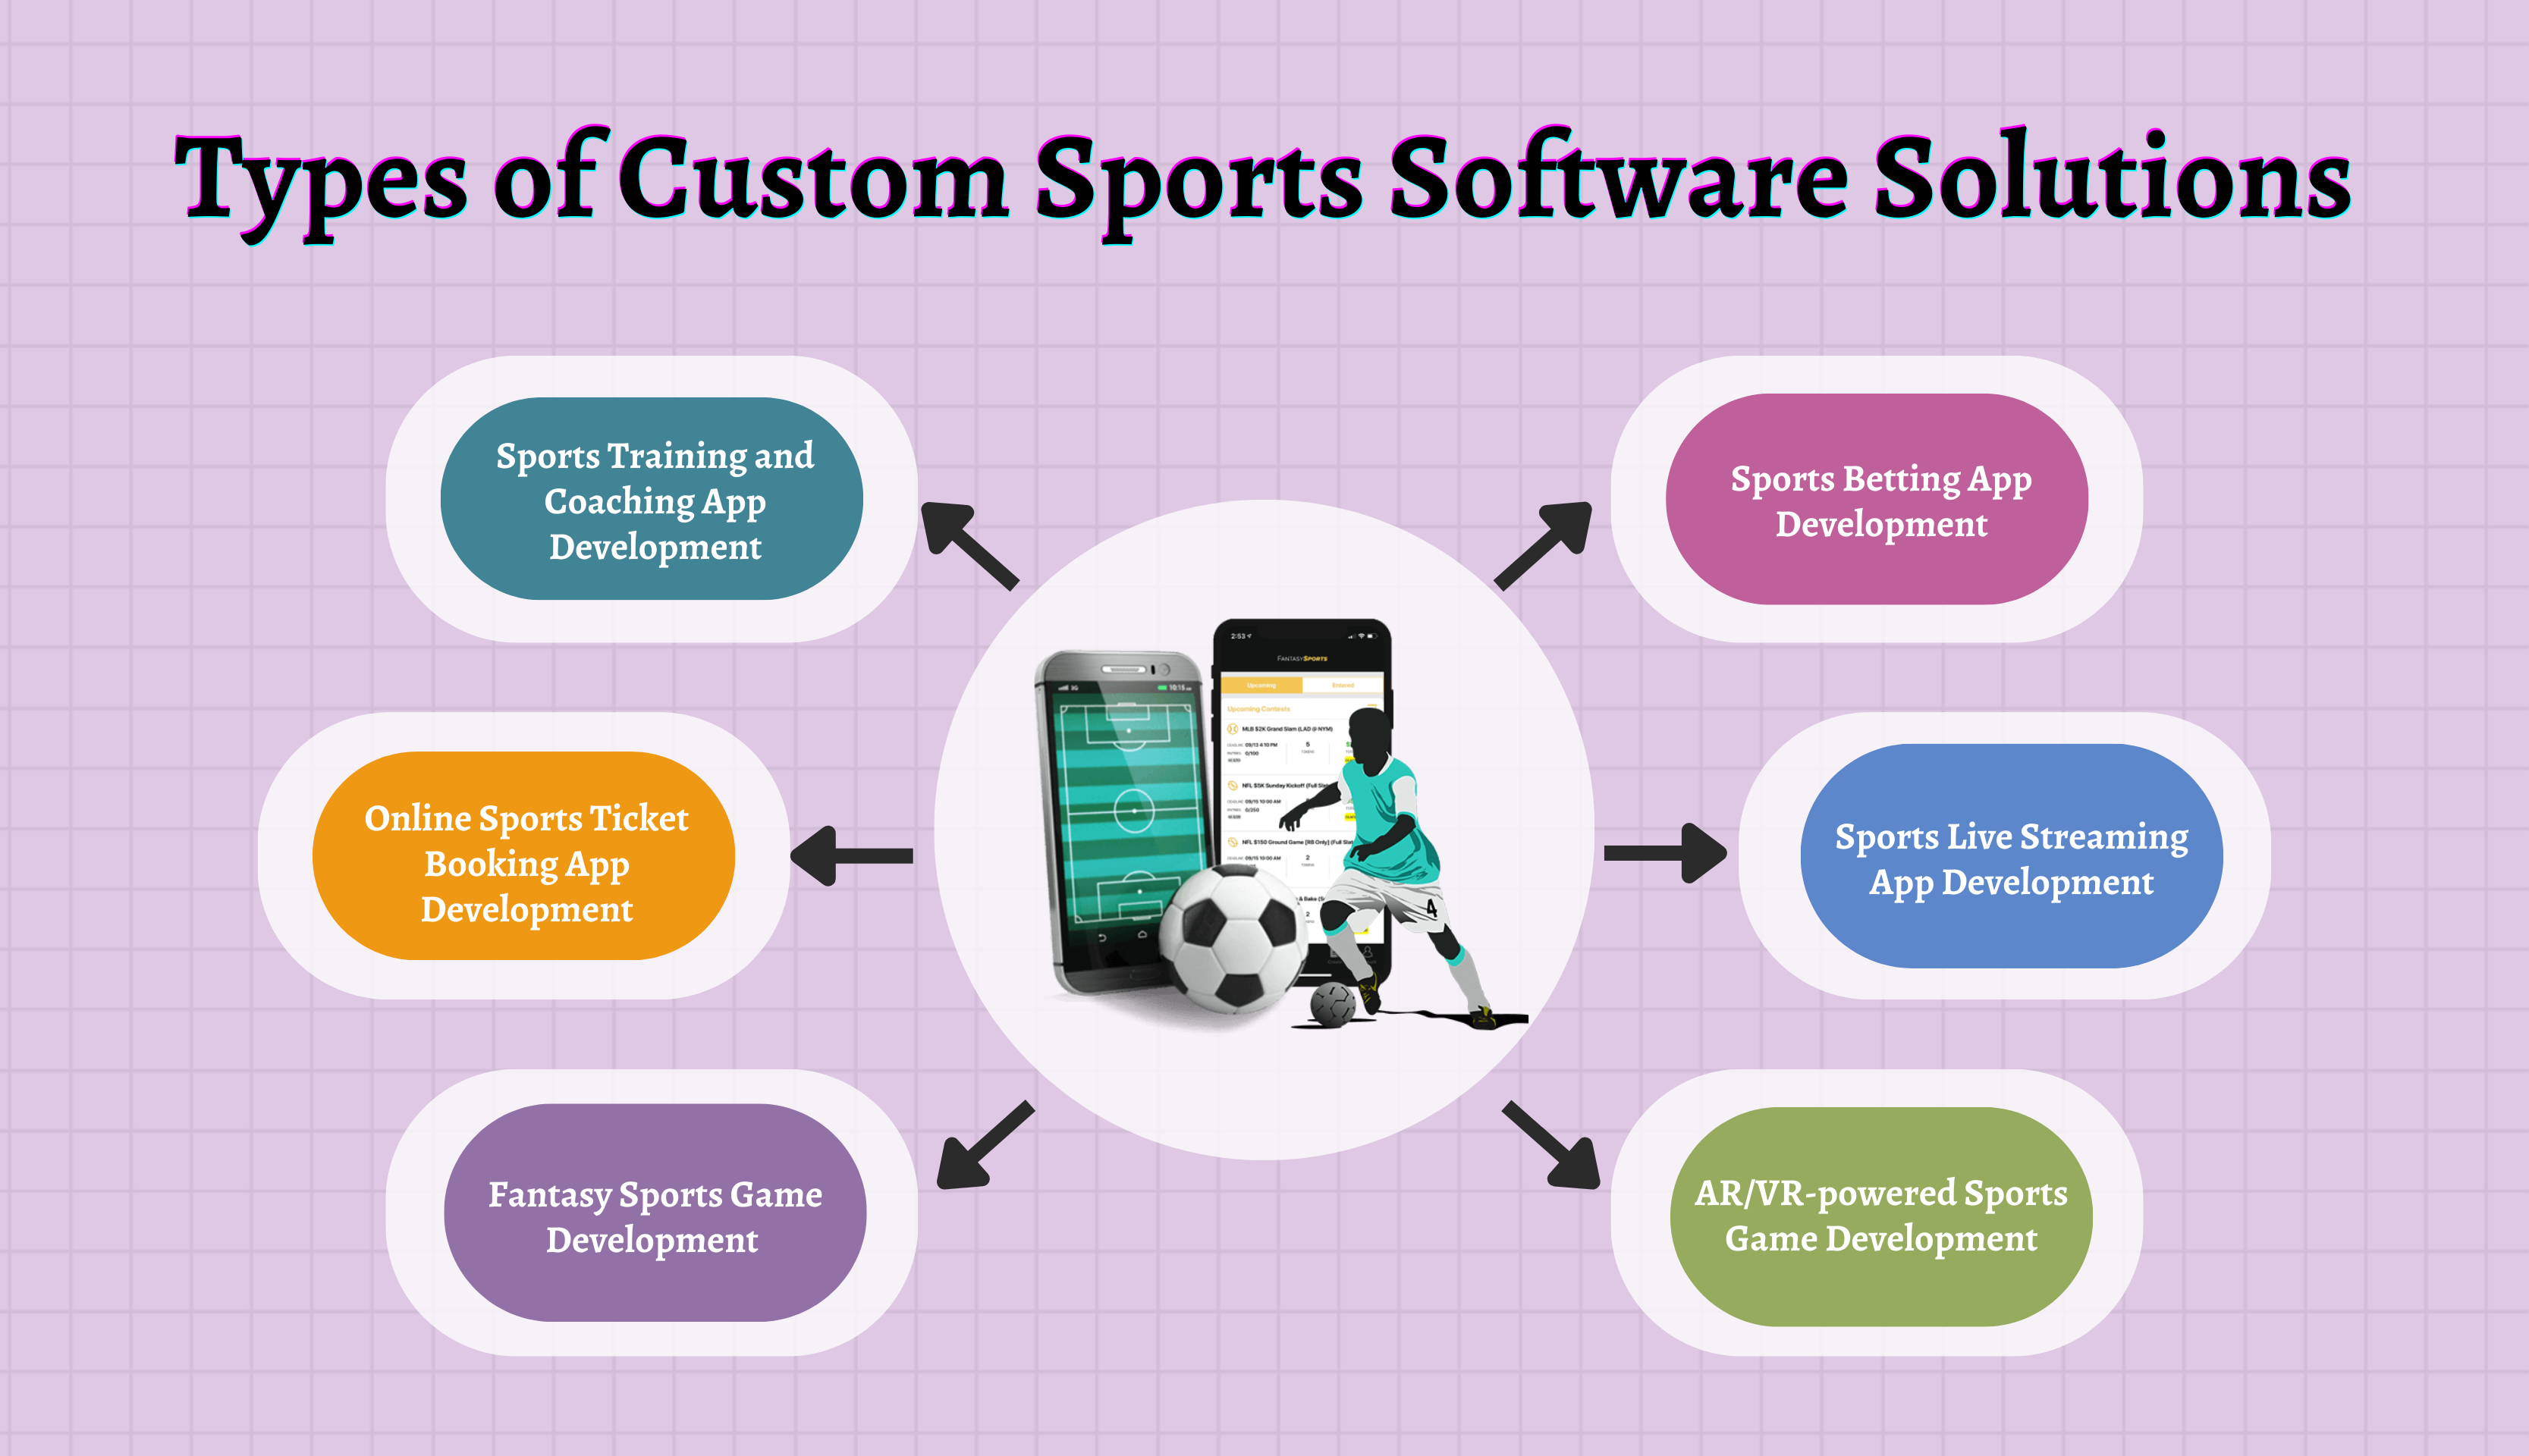 Types of Custom Sports Software Solutions